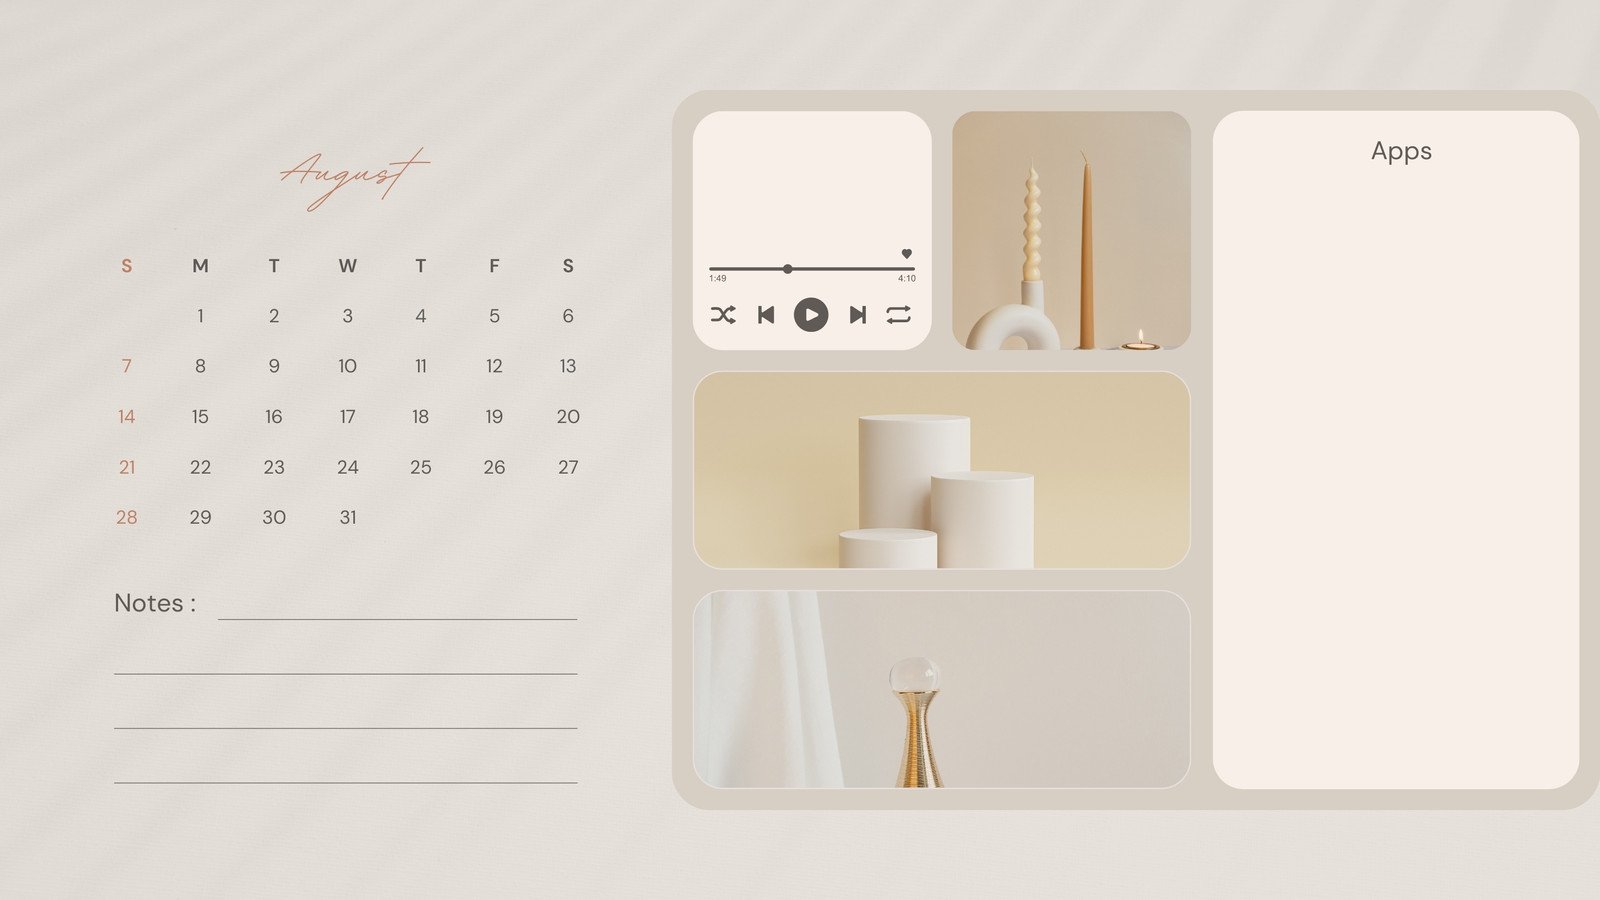 Page 3 - Free and fully customizable desktop wallpaper templates | Canva